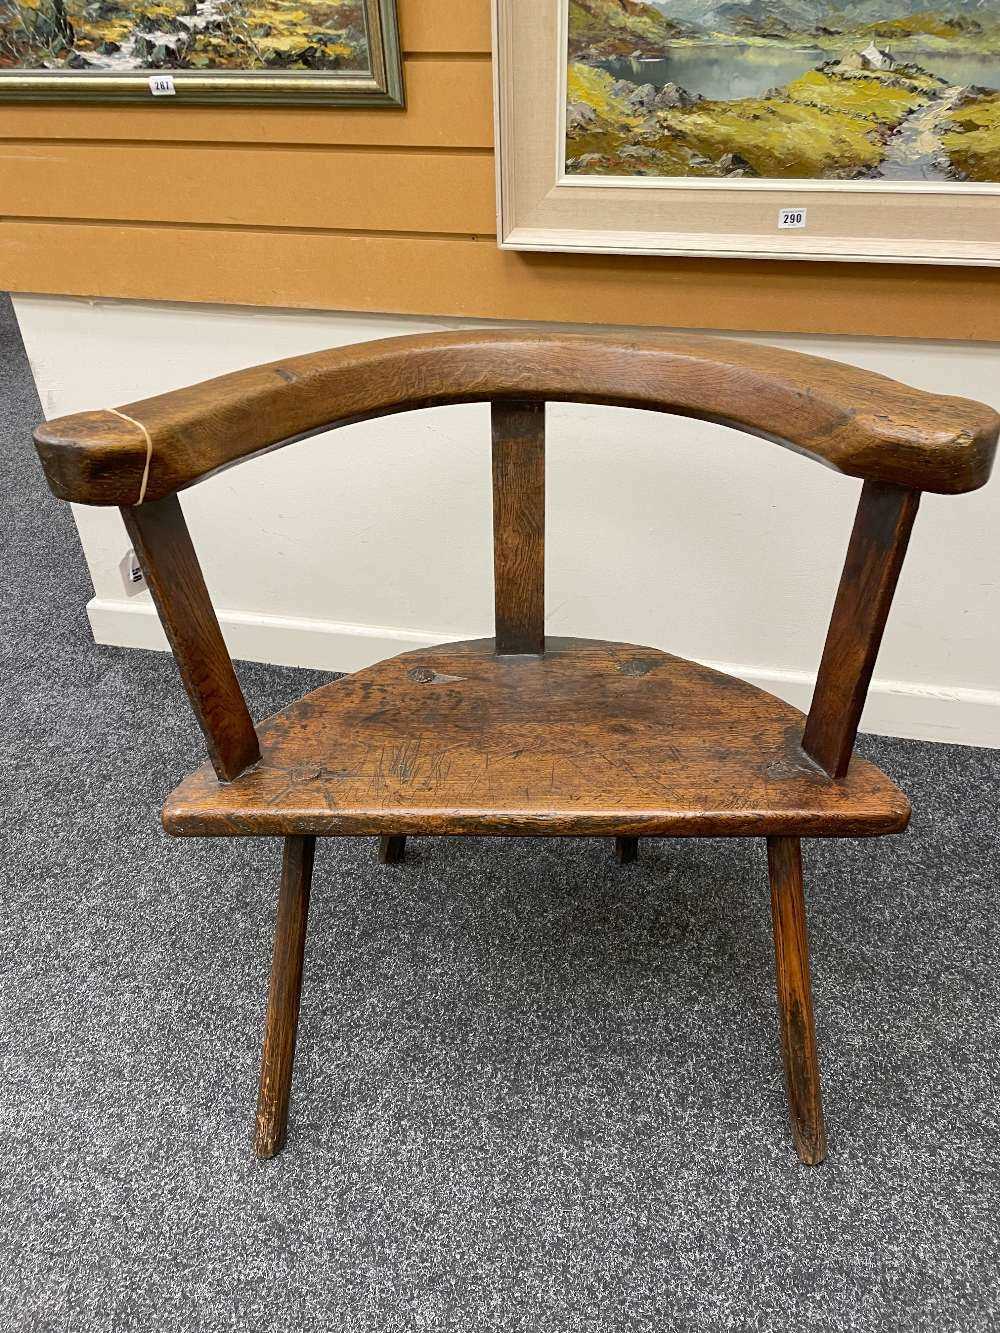 WELSH OAK, ELM & ASH YOKE-BACK CHAIR 18th Century, probably Cardiganshire, thick shaped rail above - Image 3 of 24